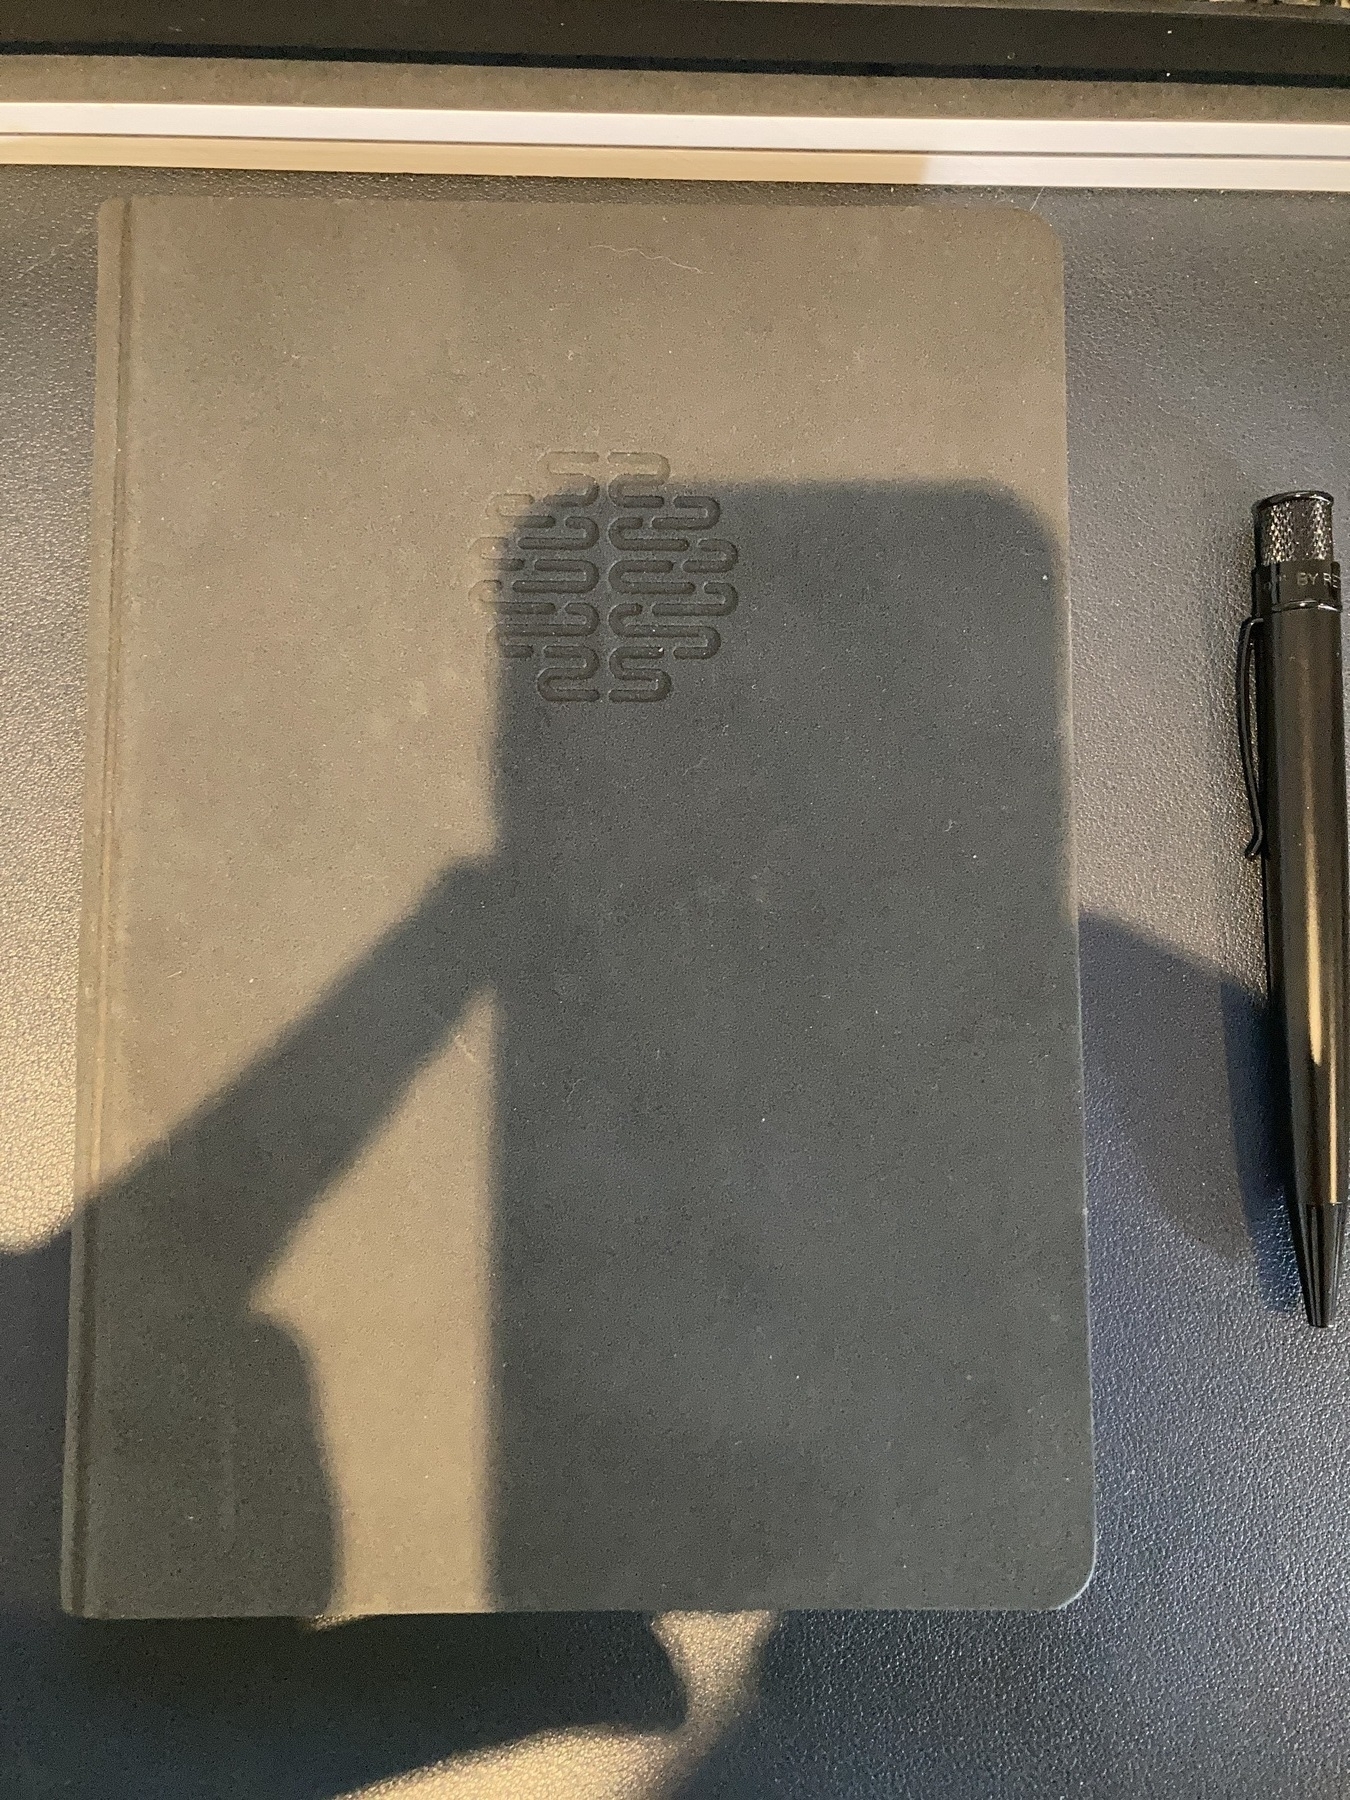 A dark notebook from above, with the shadow of my iPhone covering part of it. It is the Theme Journal notebook, with the brainwave symbol embossed in the upper-centre position of the front cover.